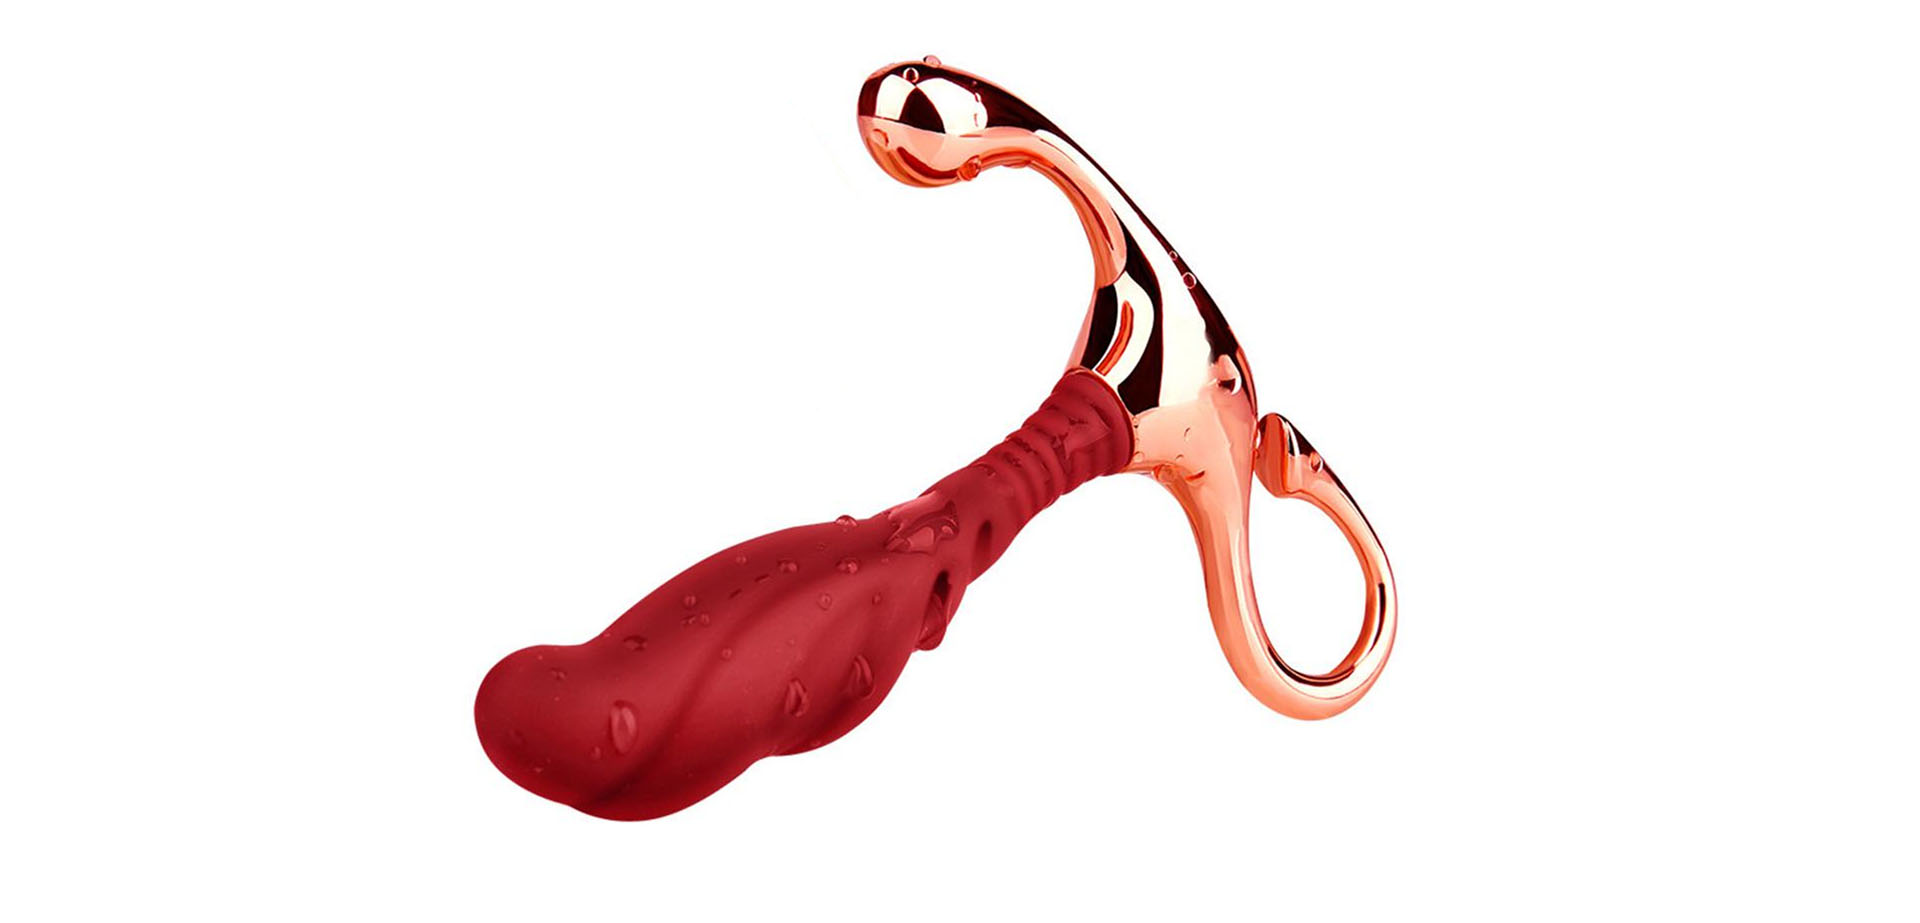 Soft Metal Silicone Prostate Massager.